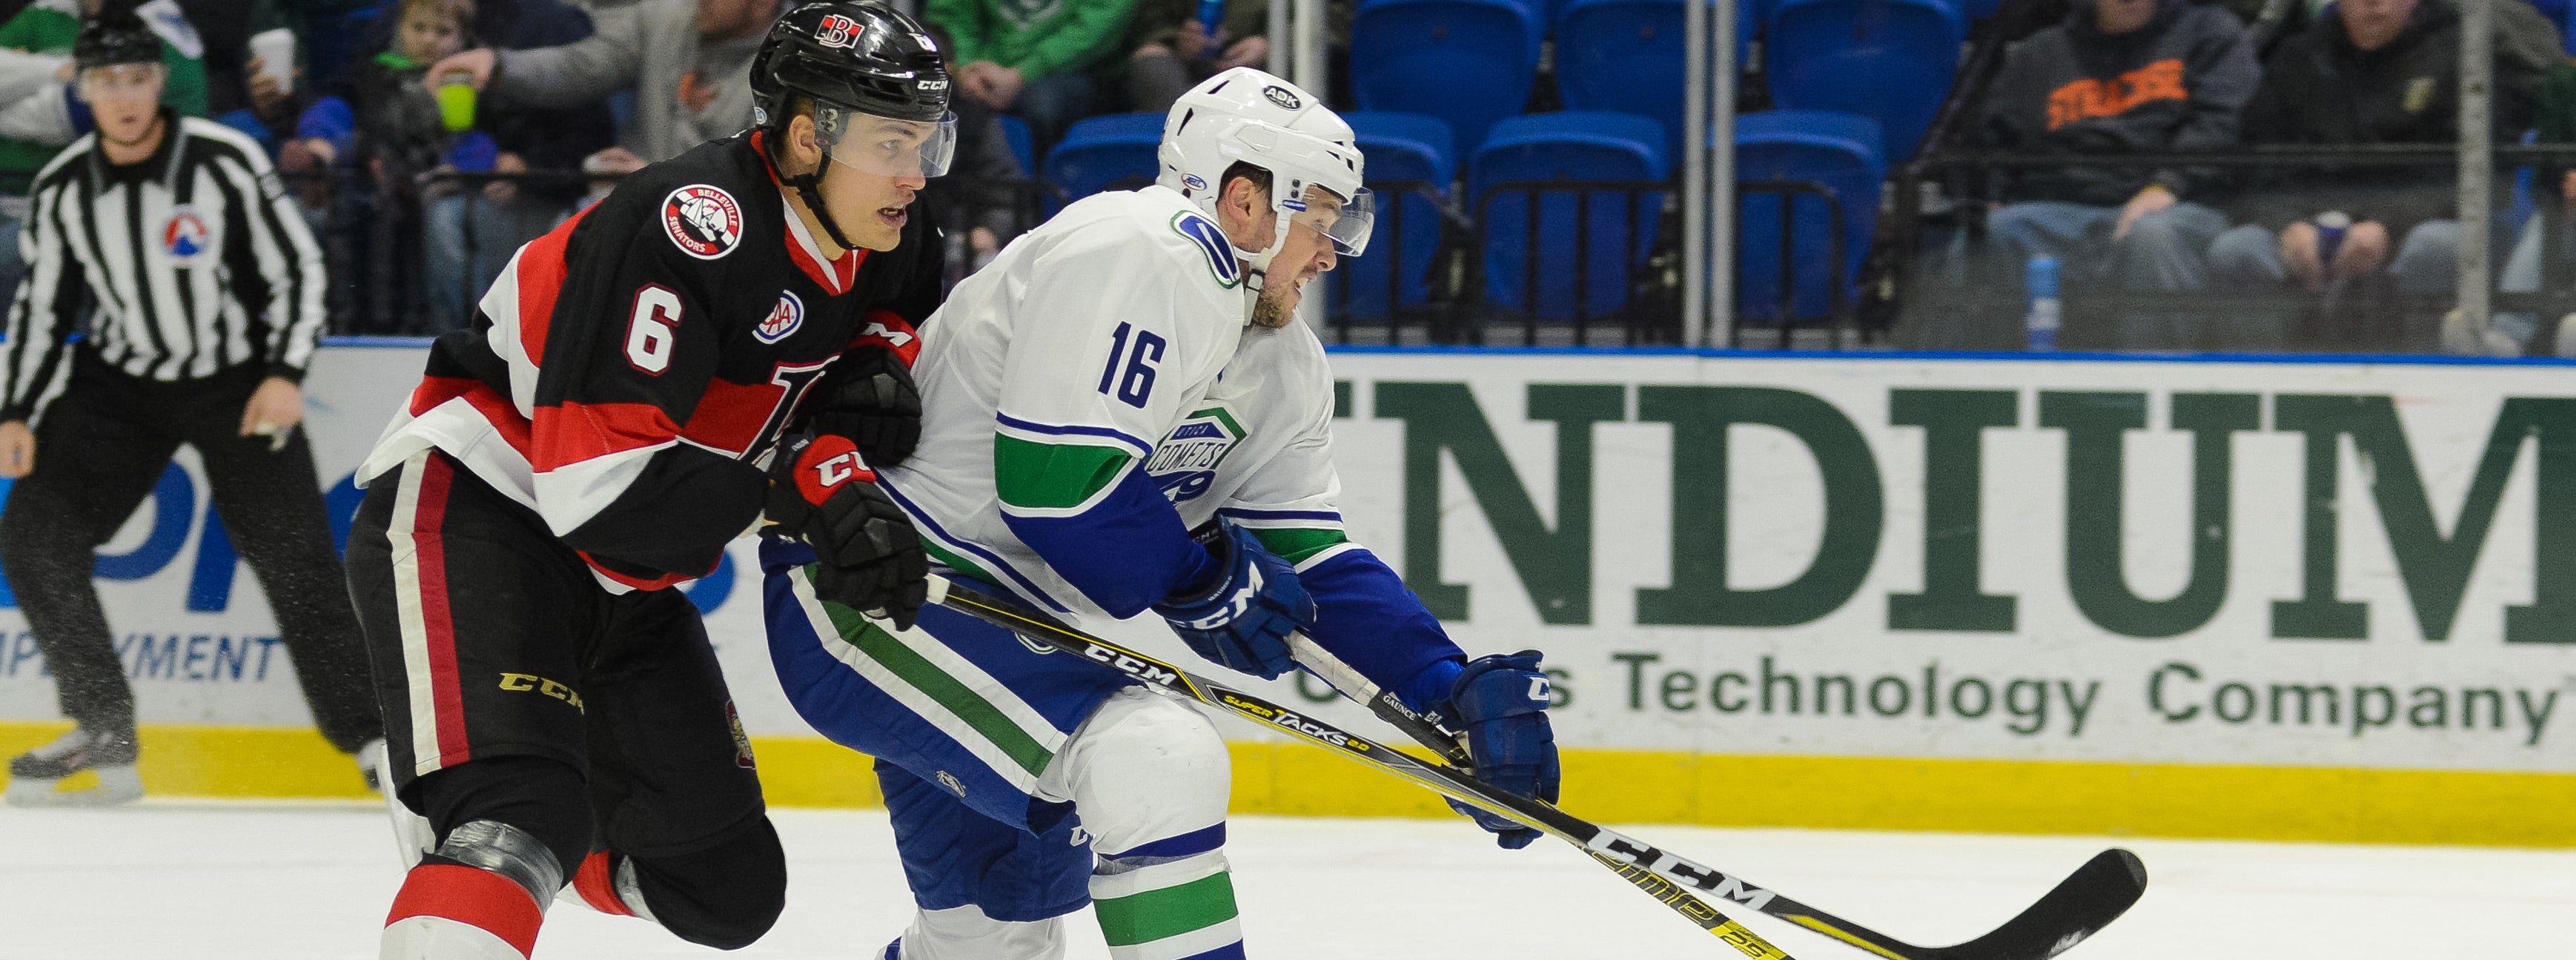 COMETS ROAD TRIP CONTINUES IN BELLEVILLE